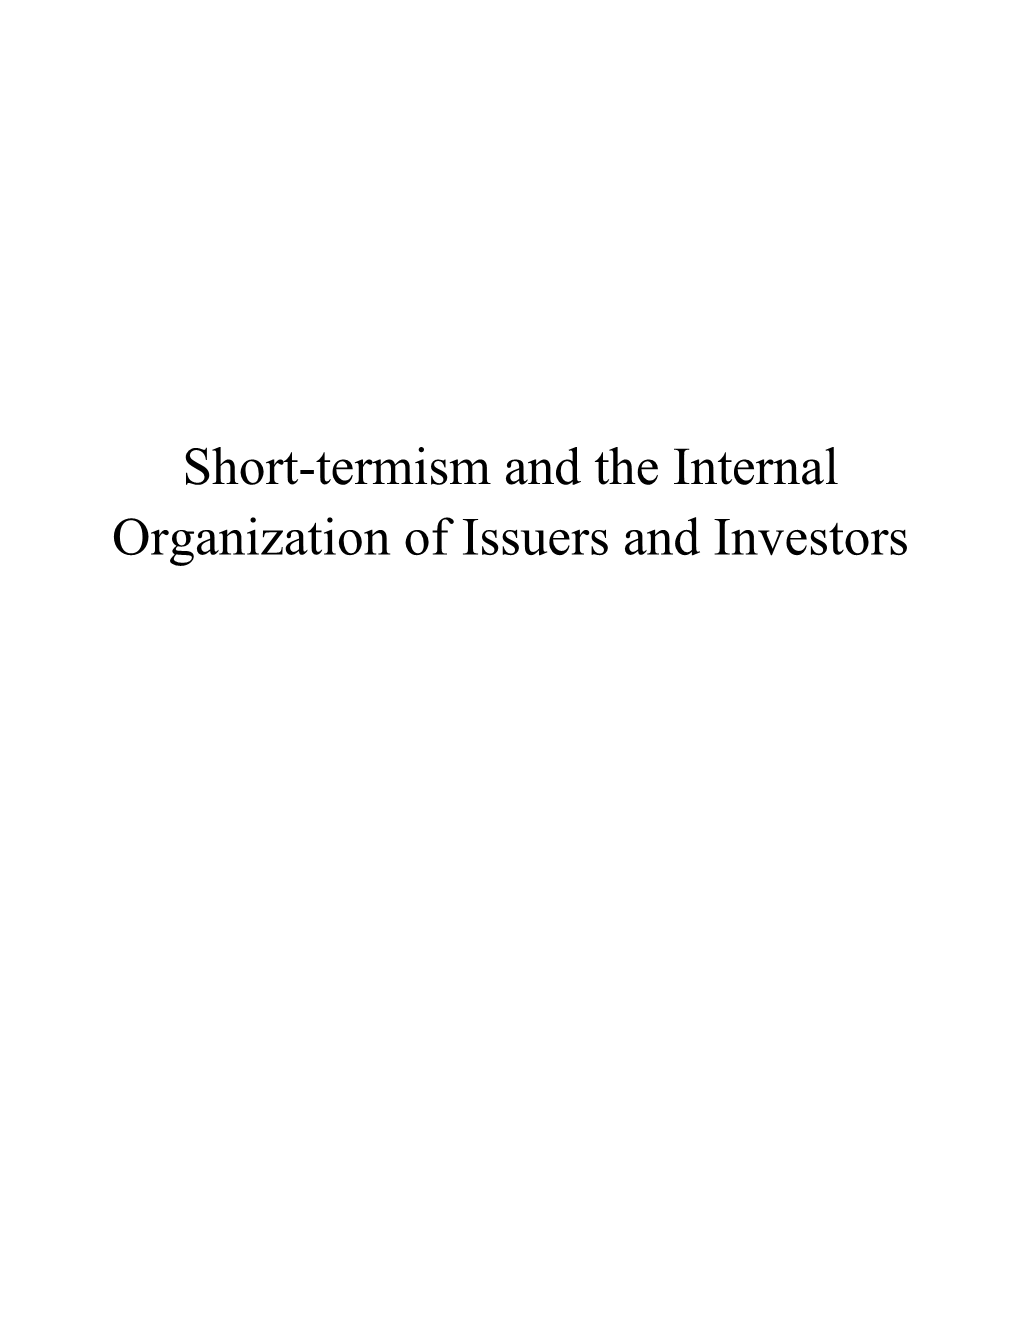 Short-Termism and the Internal Organization of Issuers and Investors